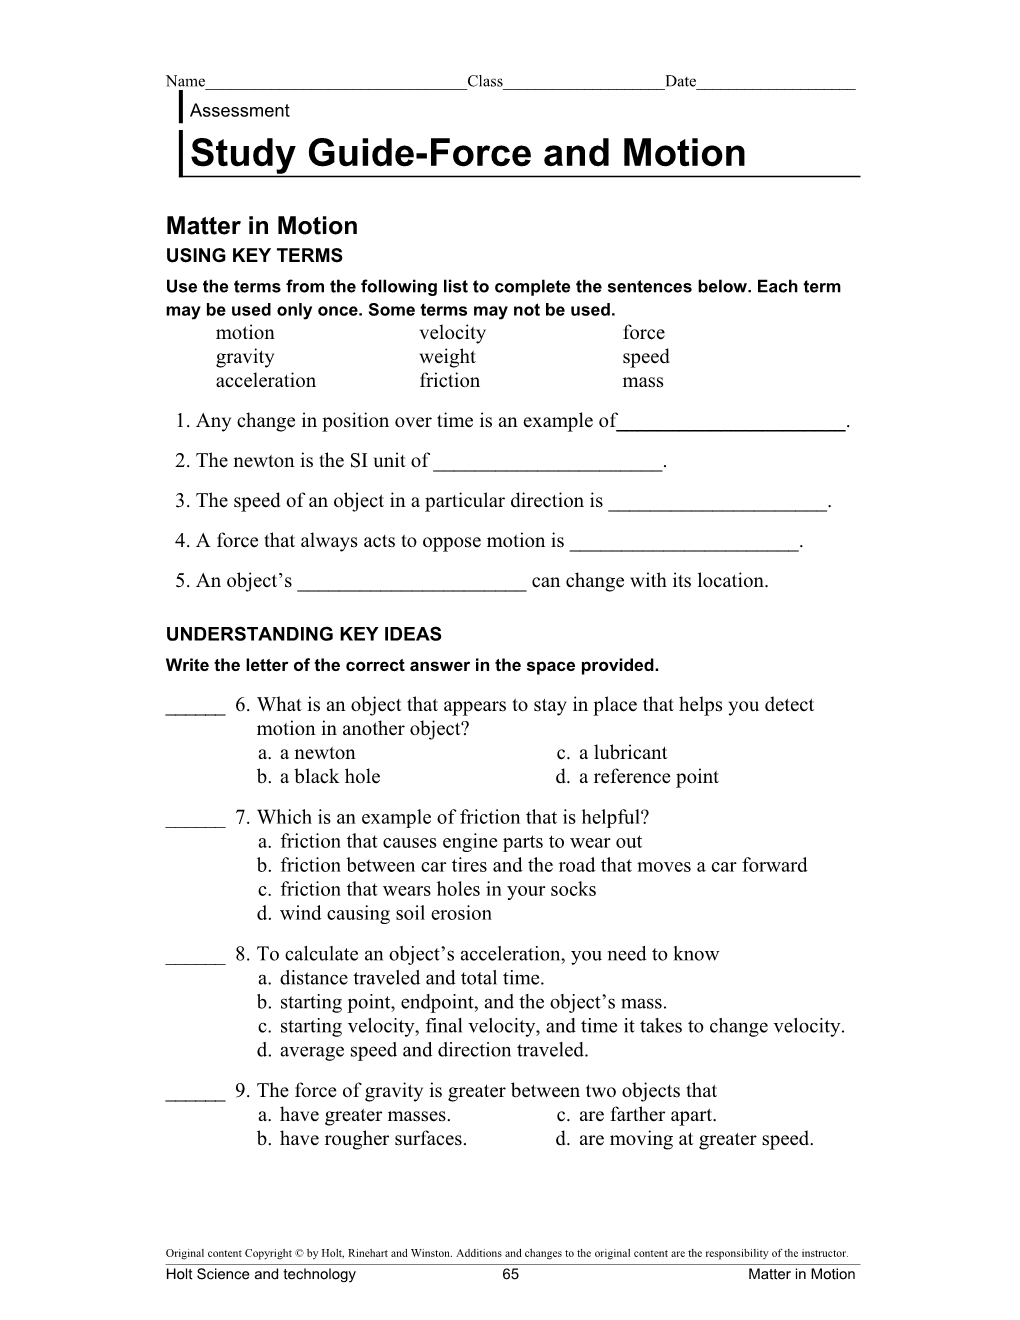 Study Guide-Force and Motion